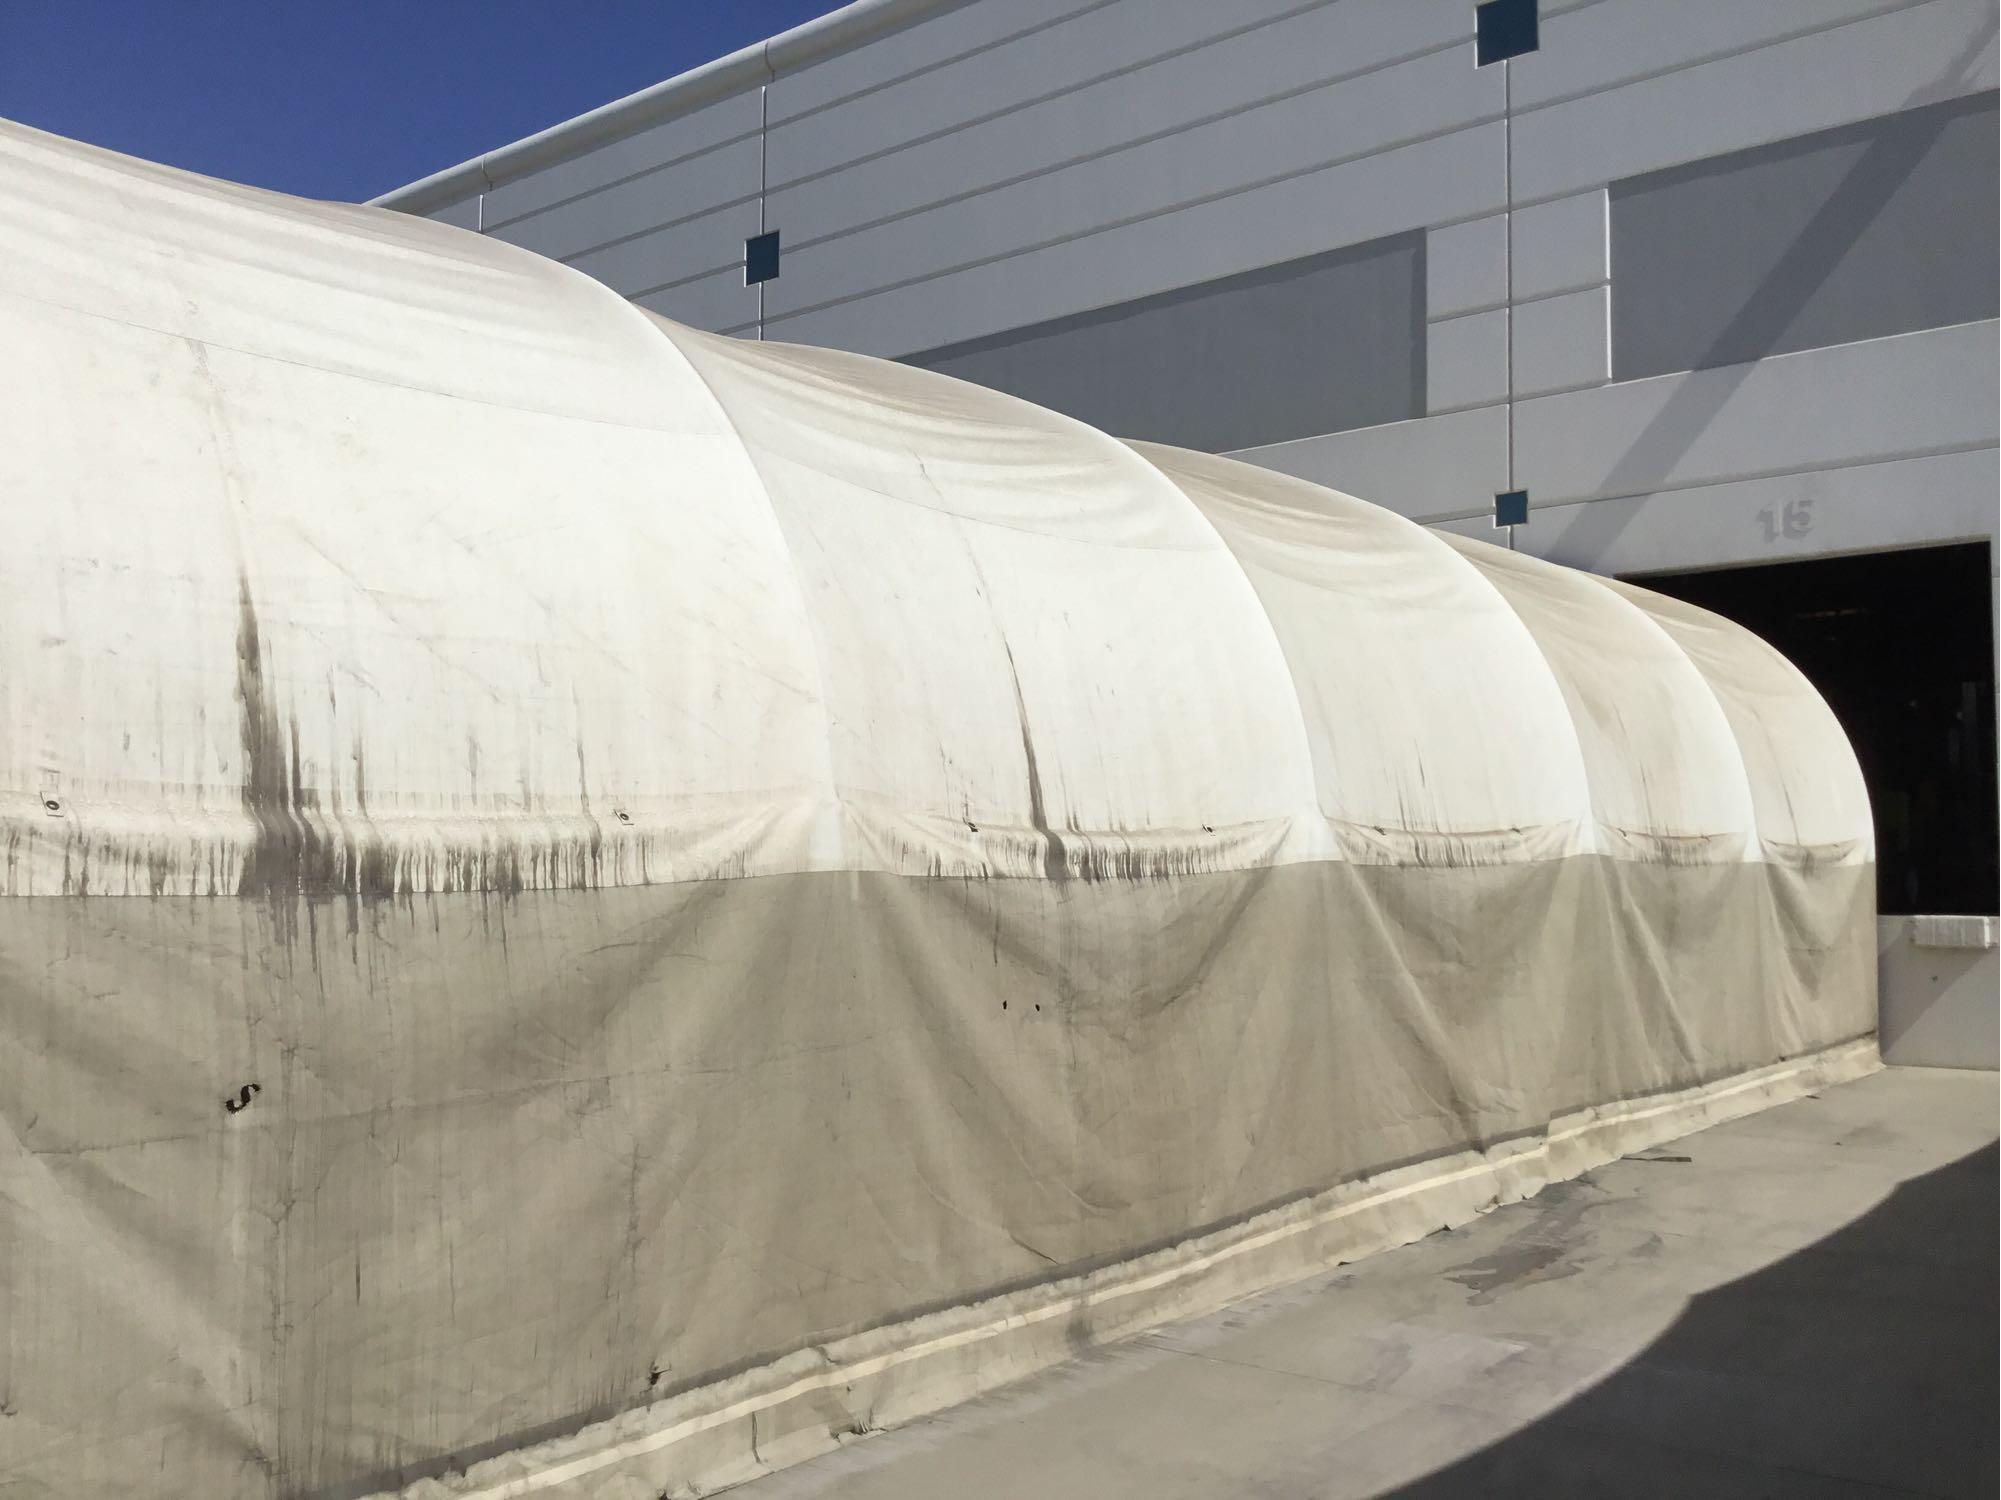 Approx. 50ft long X 40ft wide Vinyl Covered Utility Shelter